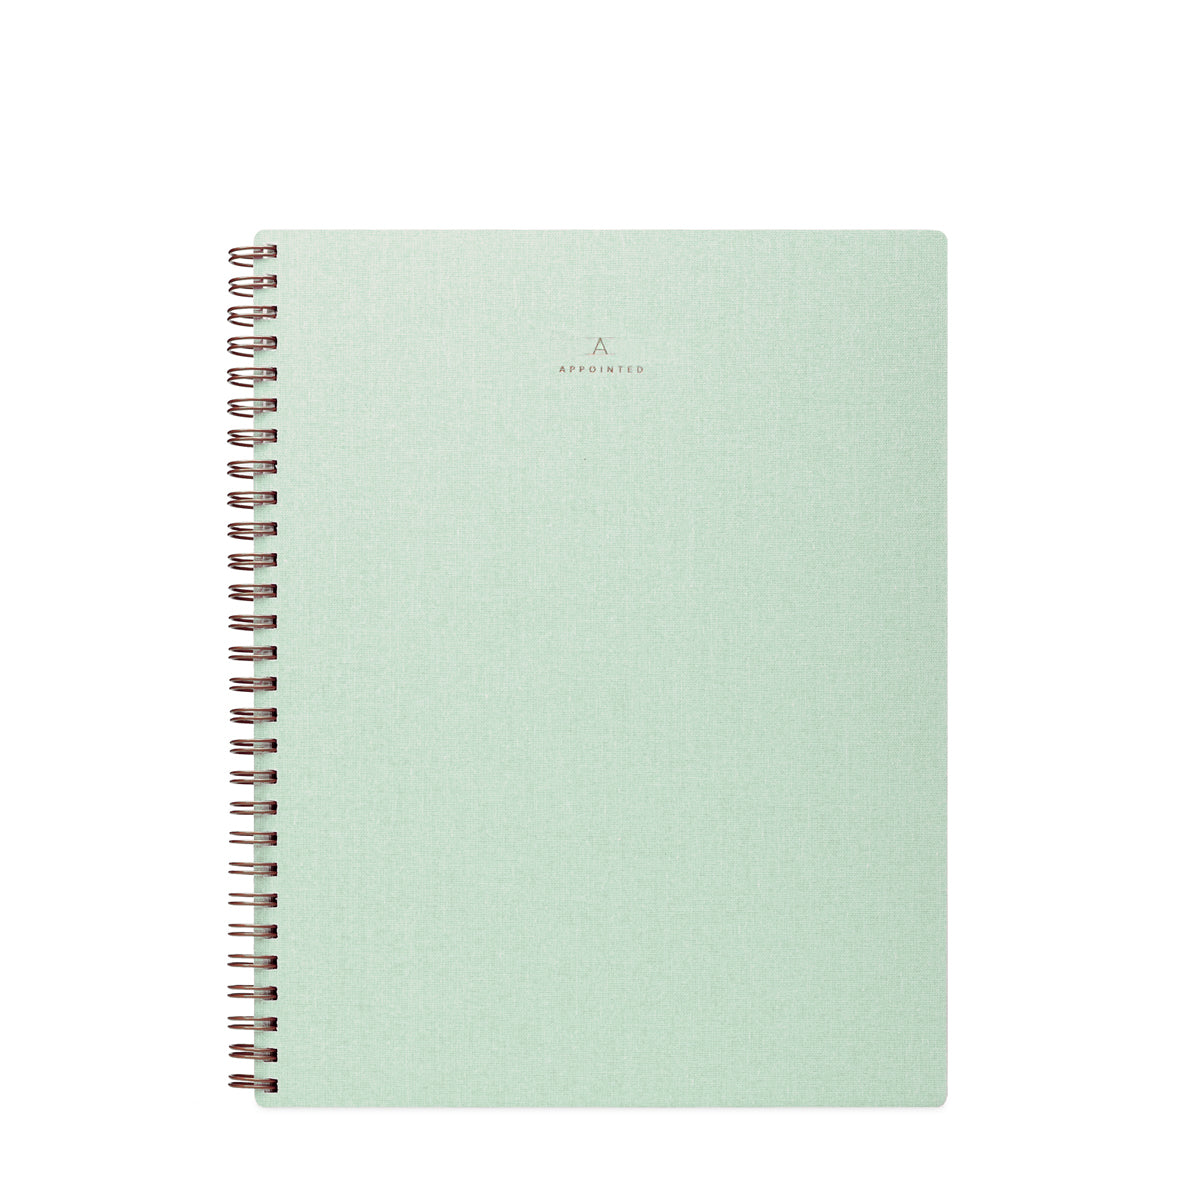 APPOINTED - NOTEBOOK - MINERAL GREEN - LINED